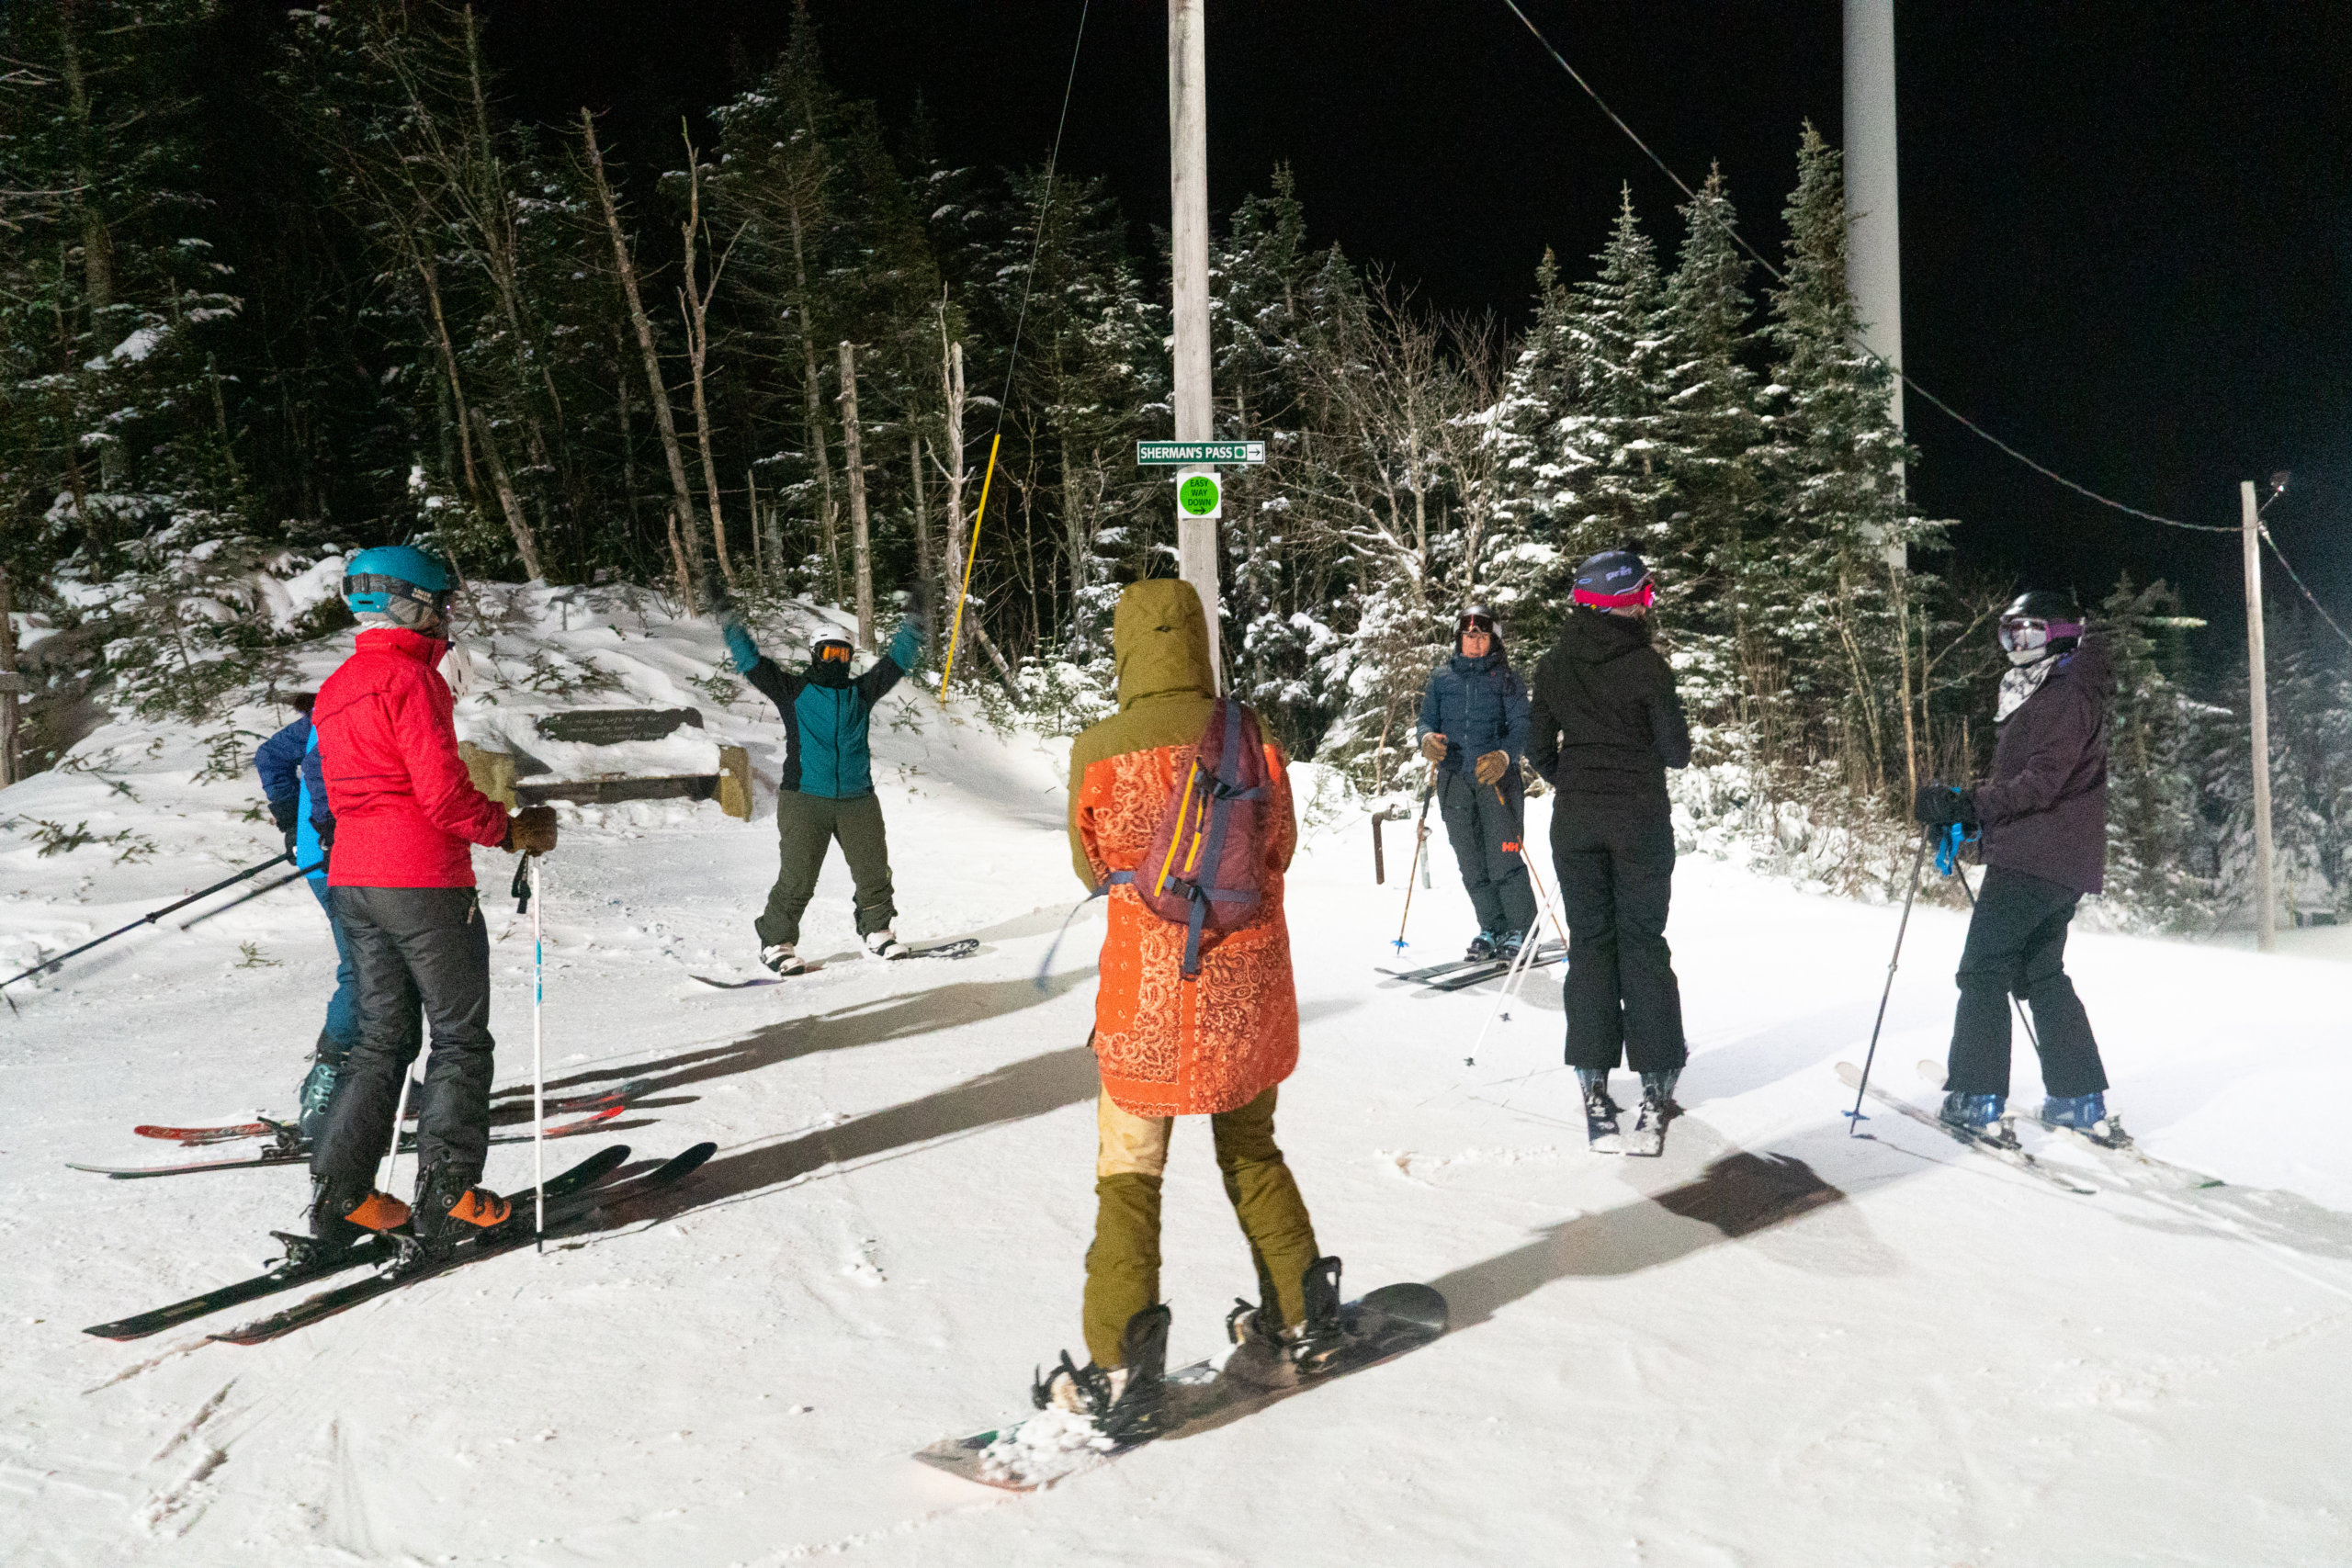 A group of skiiers and riders gathered on the top of the mountain against a night sky